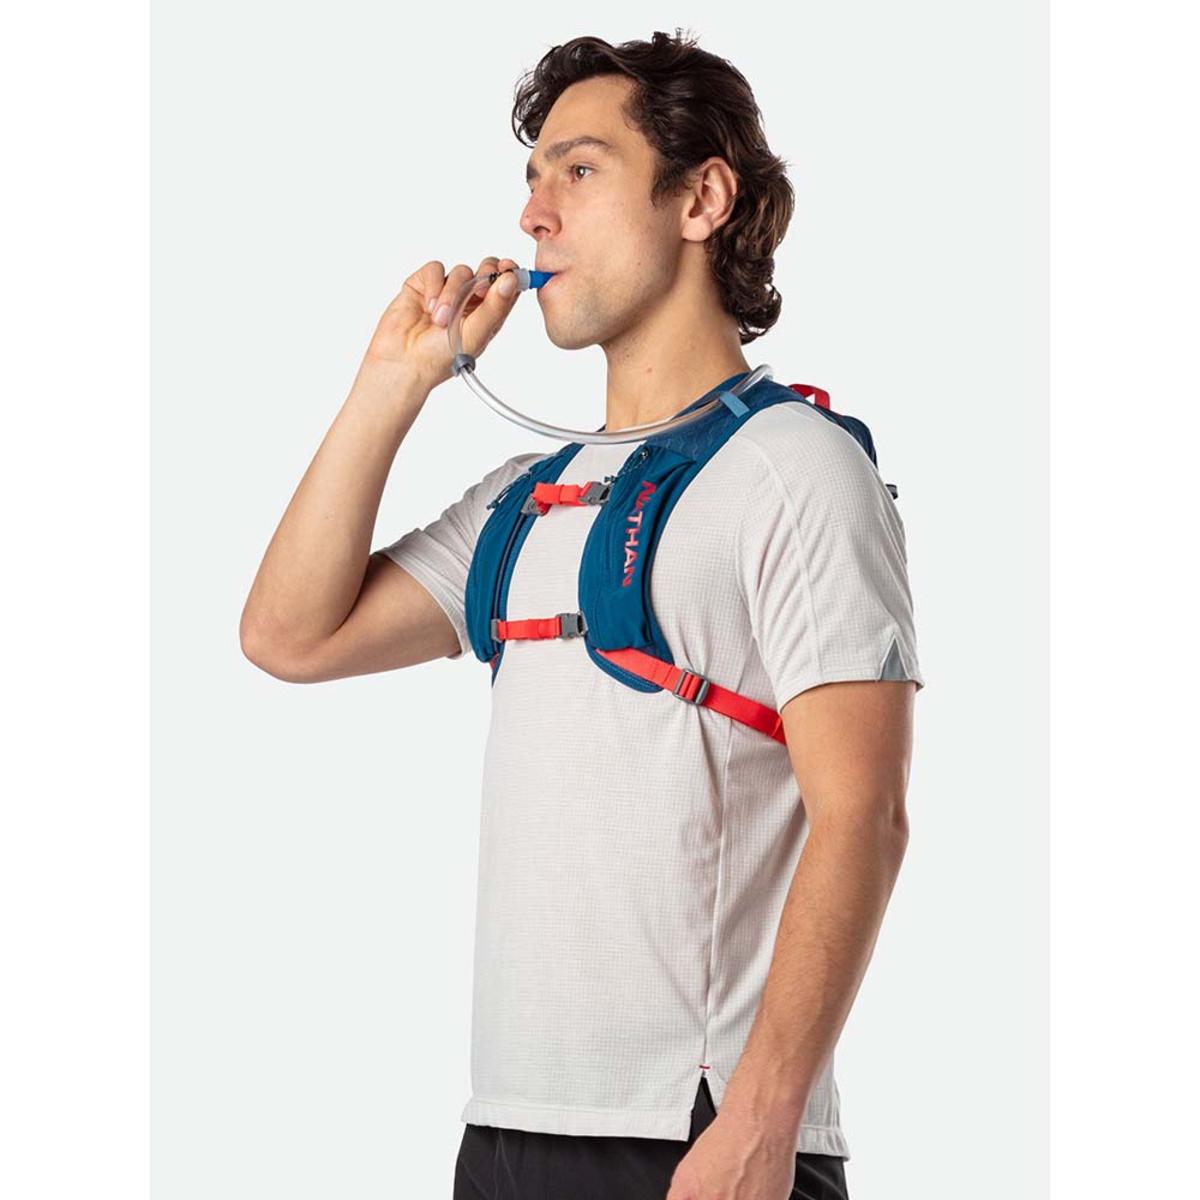 Nathan Unisex Crossover 5 Liter Hydration Pack